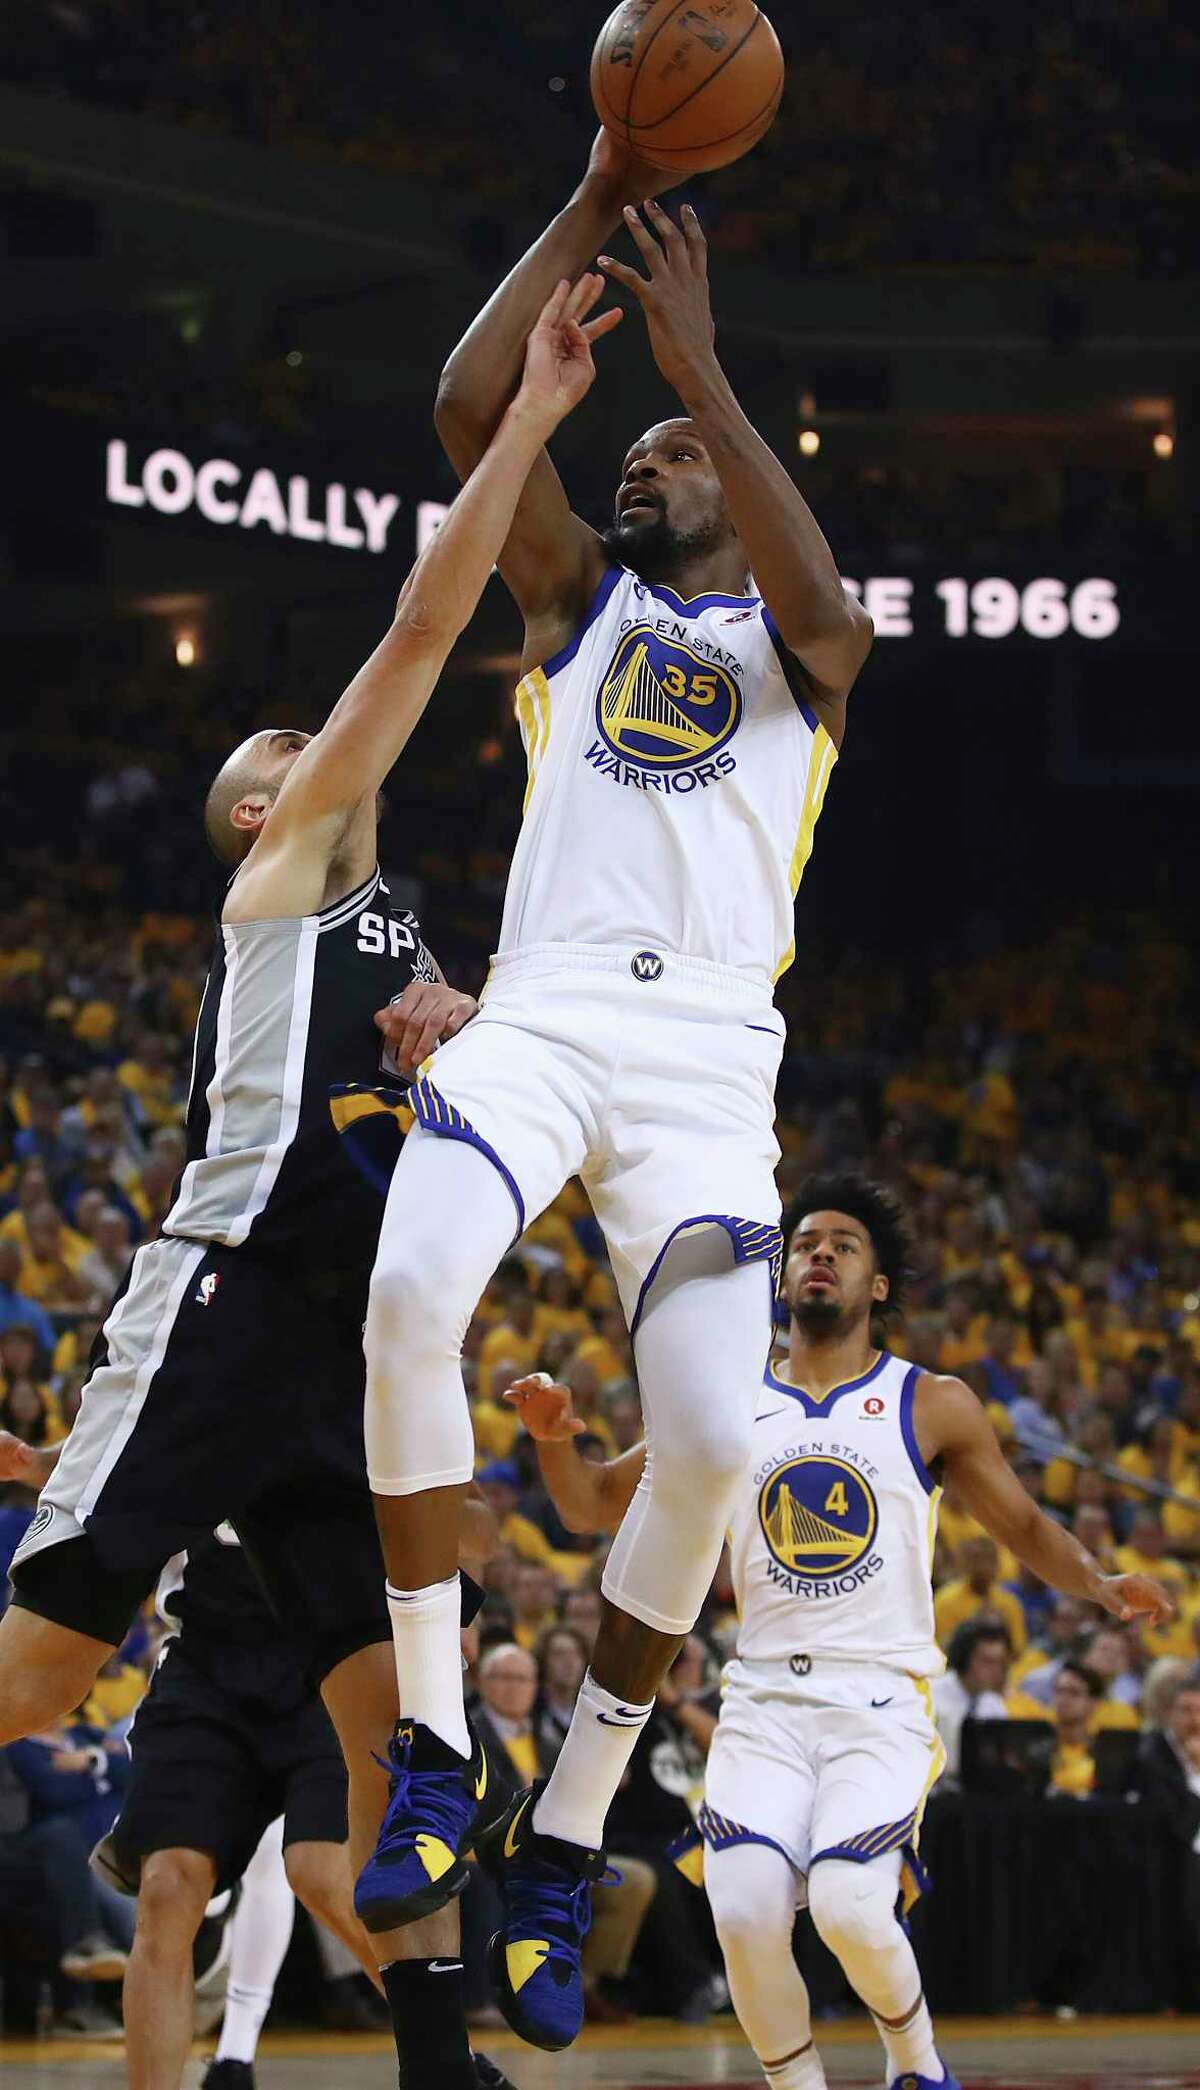 Golden State Warriors' Kevin Durant (35) shoots against San Antonio Spurs' Manu Ginobili, left, during the first quarter in Game 5 of a first-round NBA basketball playoff series Tuesday, April 24, 2018, in Oakland, Calif. (AP Photo/Ben Margot)